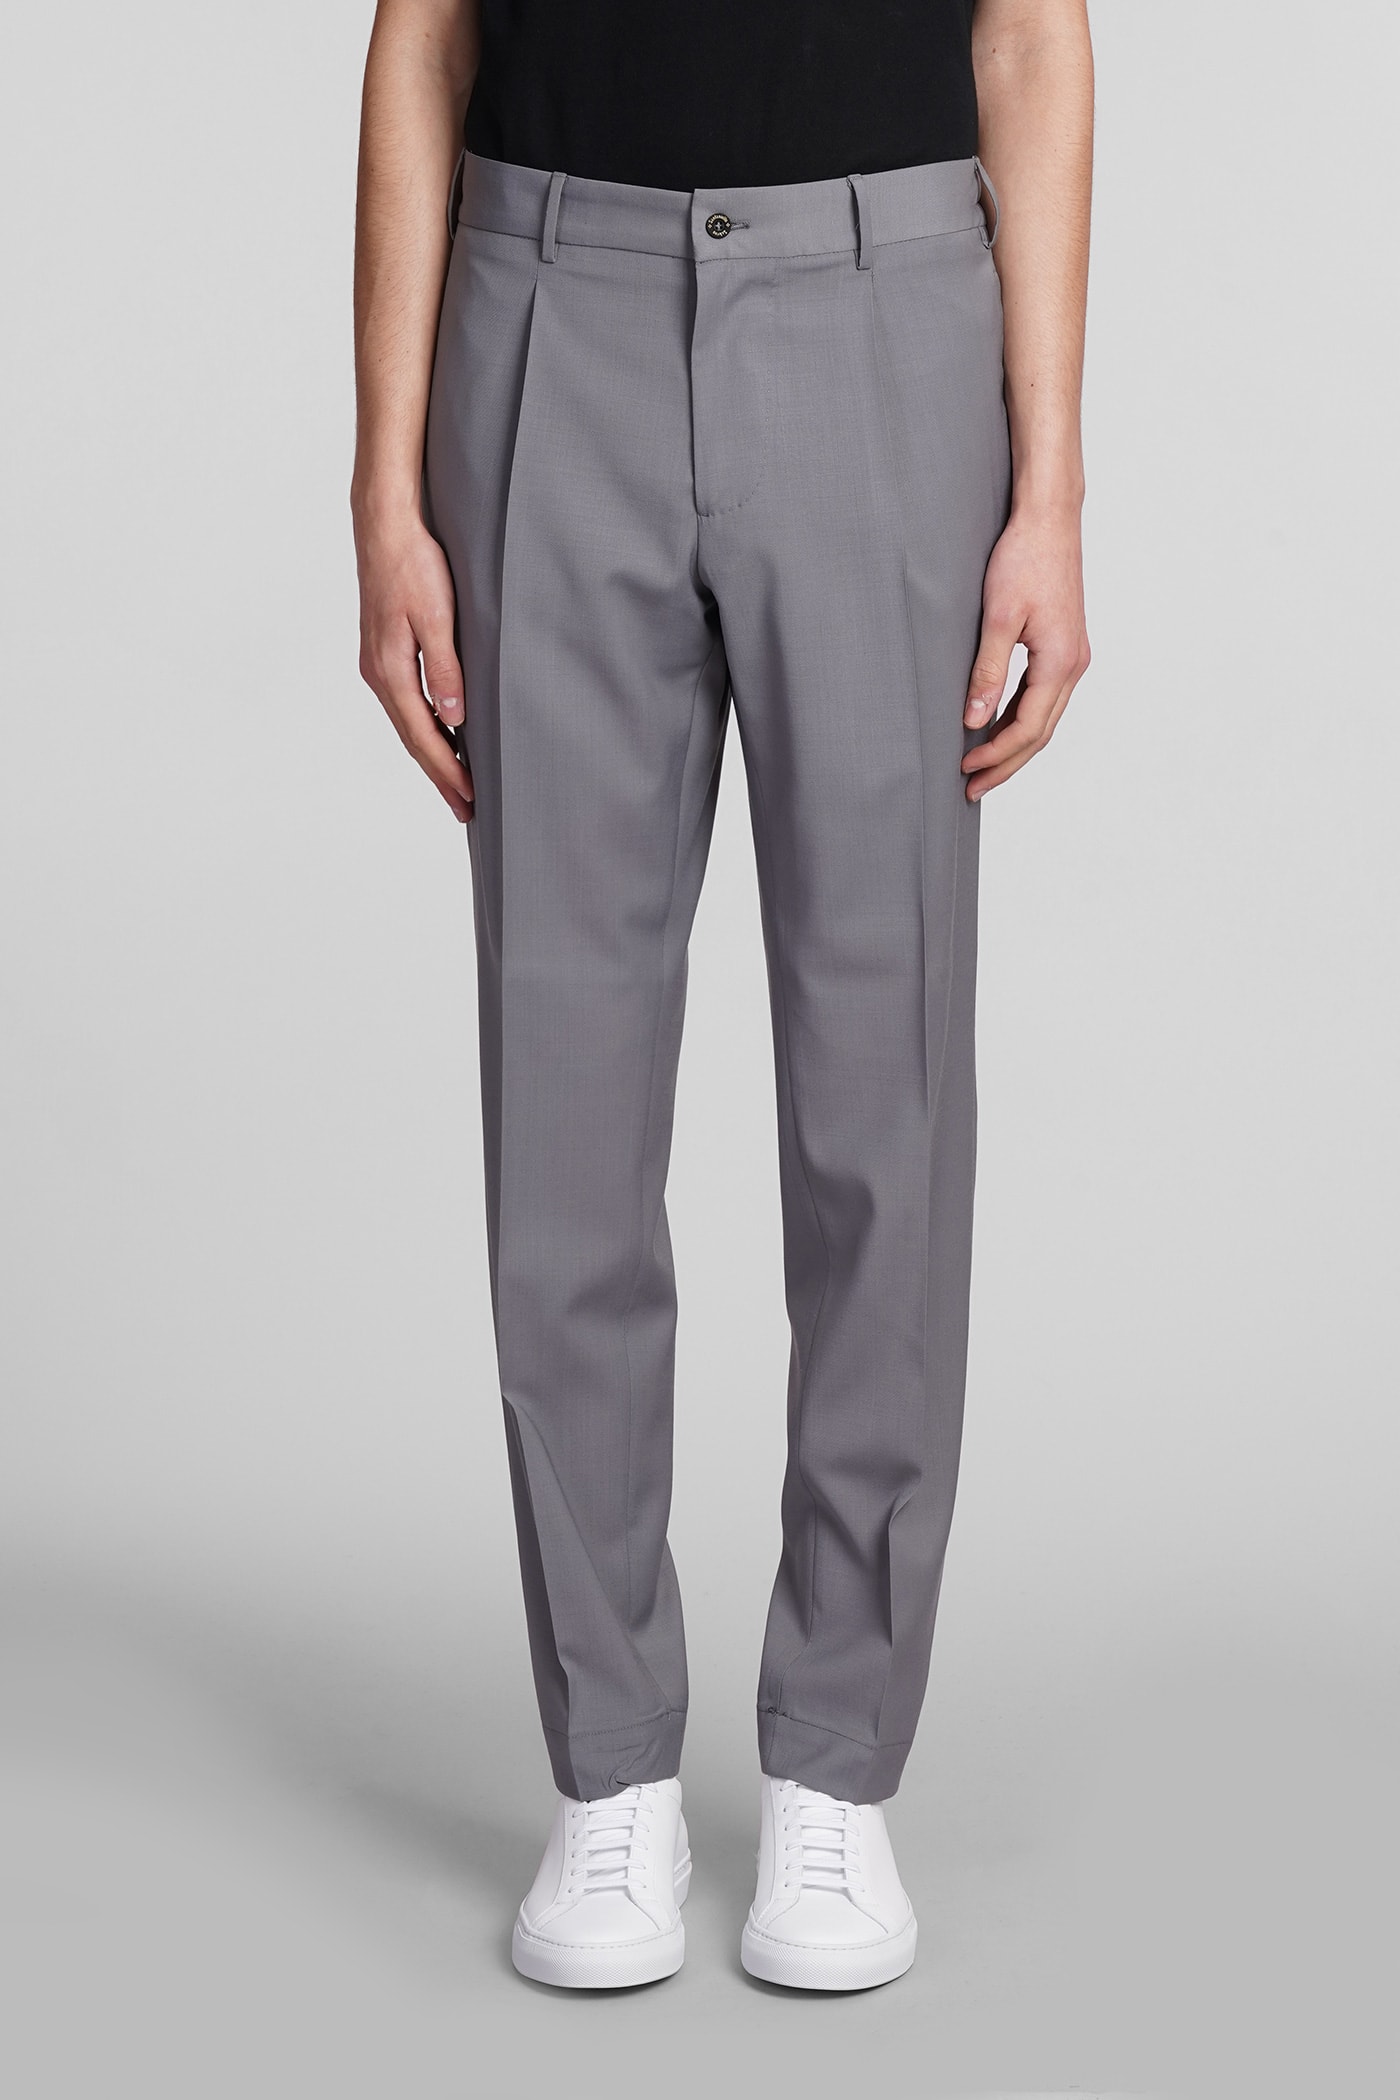 Pants In Grey Polyester